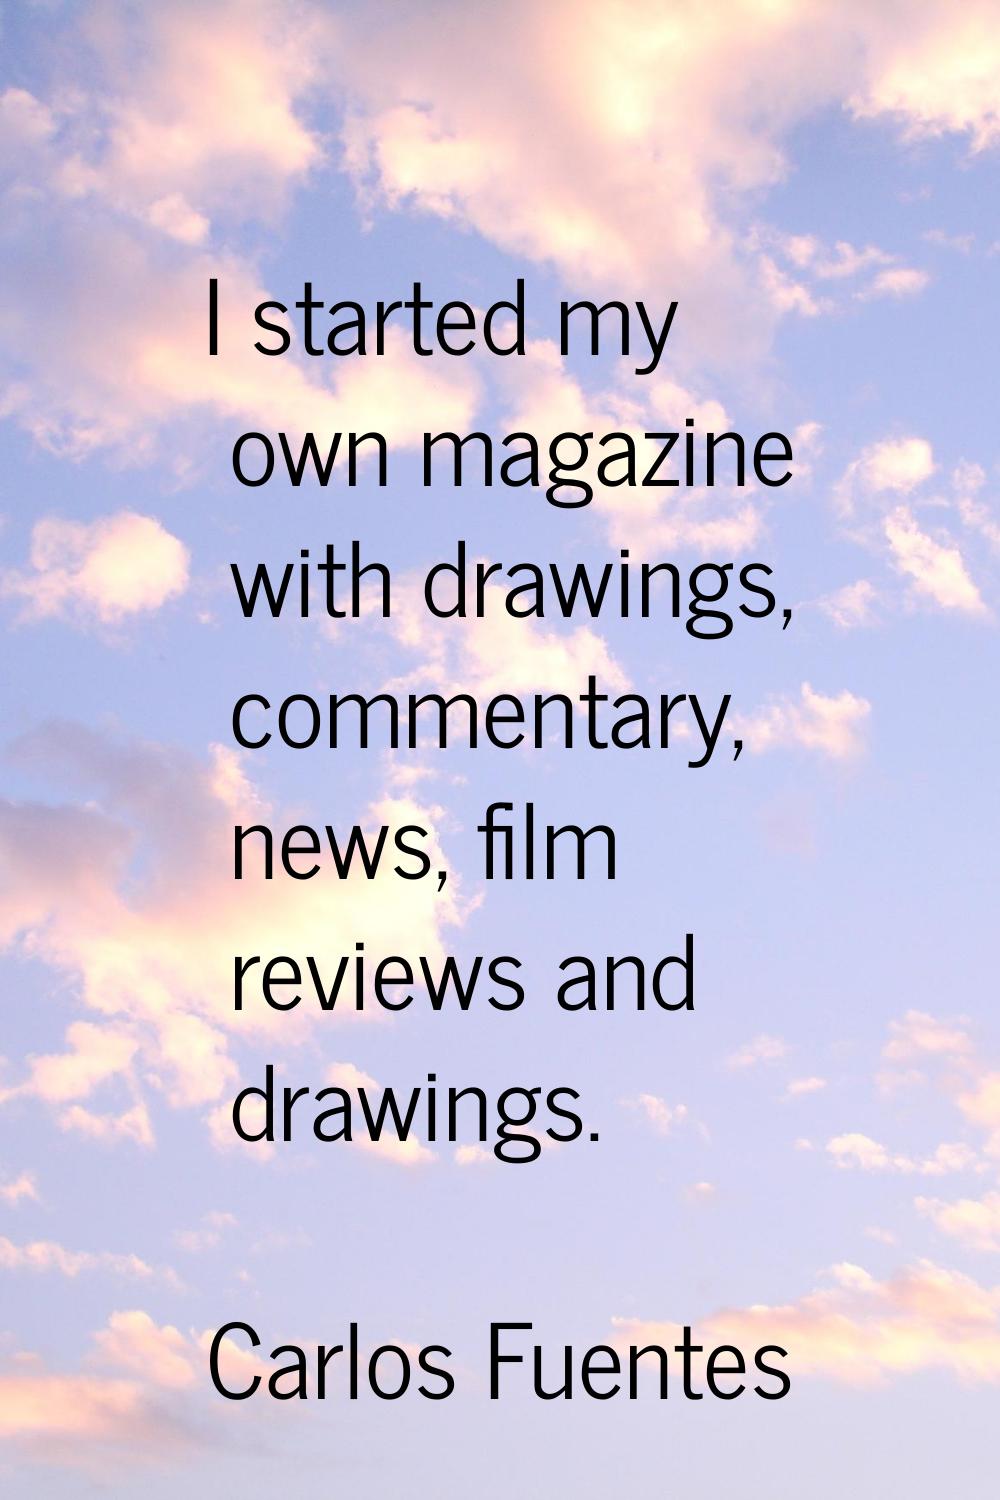 I started my own magazine with drawings, commentary, news, film reviews and drawings.